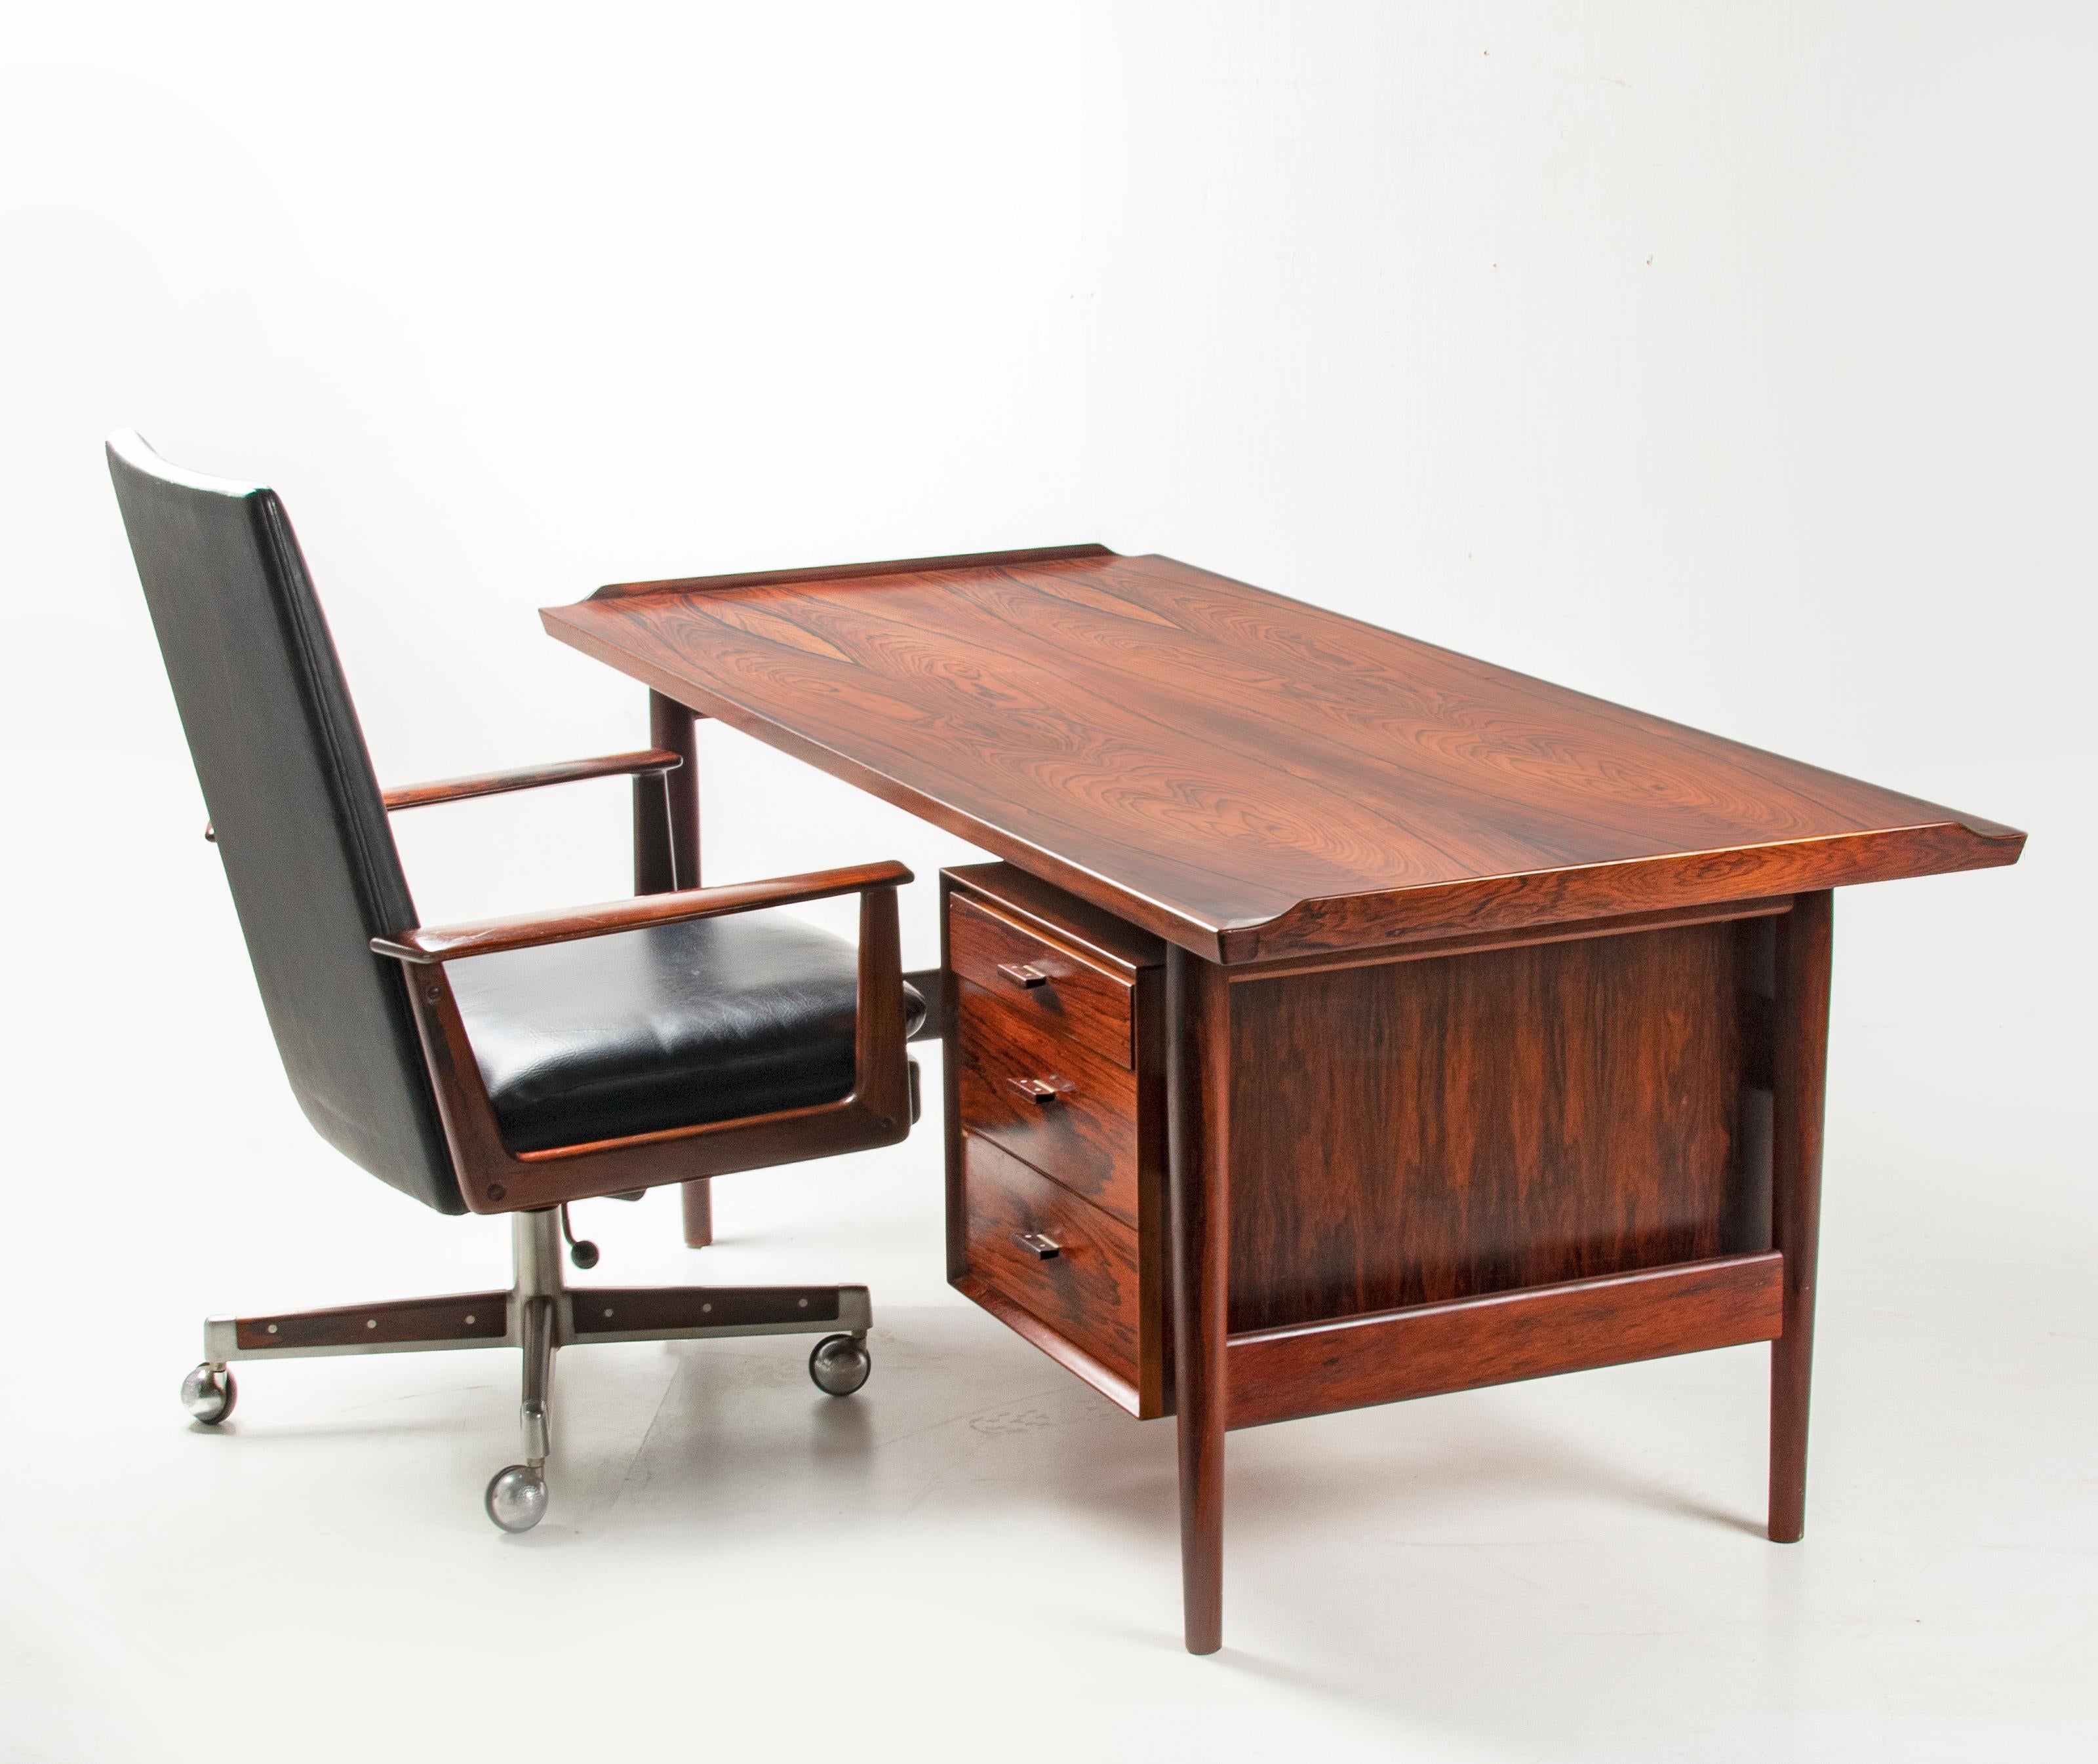 An amazing executive desk with matching office chair. The design is by Arne vodder, based on Model Nor 207. The desk and chair are made by Sibast from Denmark. Because there are only drawers on one side, there is plenty of space for the chair. The